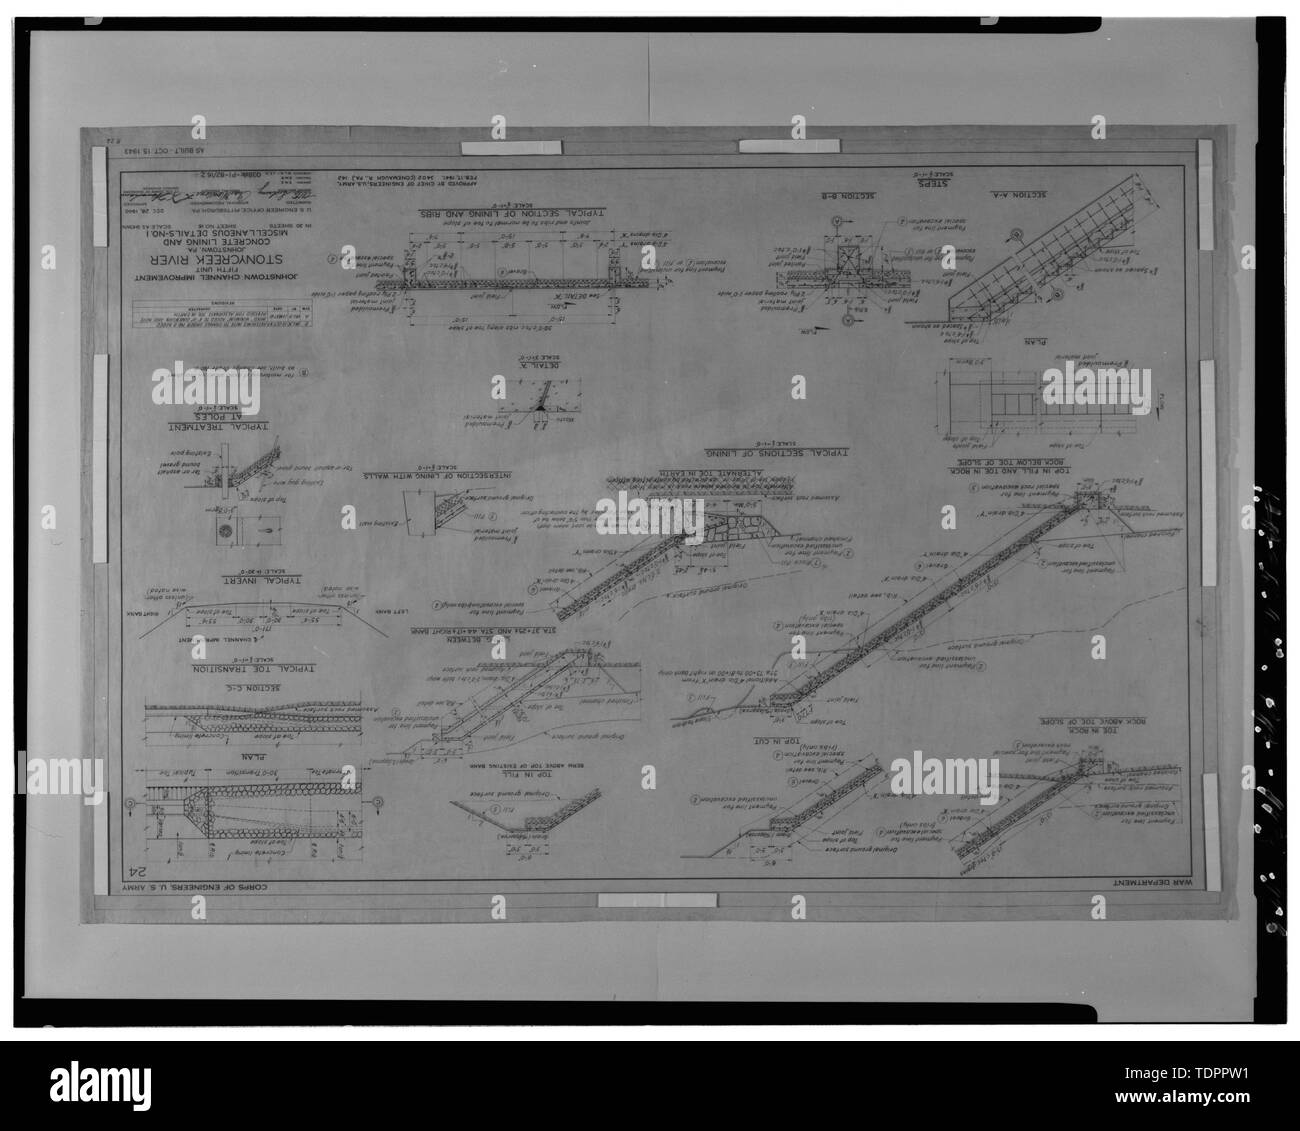 Photographic copy of original drawing, by Corps of Engineers, U.S. Army, December 28, 1940 (original in possession of Corps of Engineers, U.S. Army, Pittsburgh District, Engineering Division files) Unit 5, concrete lining and miscellaneous details -1 - Johnstown Local Flood Protection Project, Beginning on Conemaugh River approx 3.8 miles downstream from confluence of Little Conemaugh and Stony Creek Rivers at Johnstown, Johnstown, Cambria County, PA Stock Photo